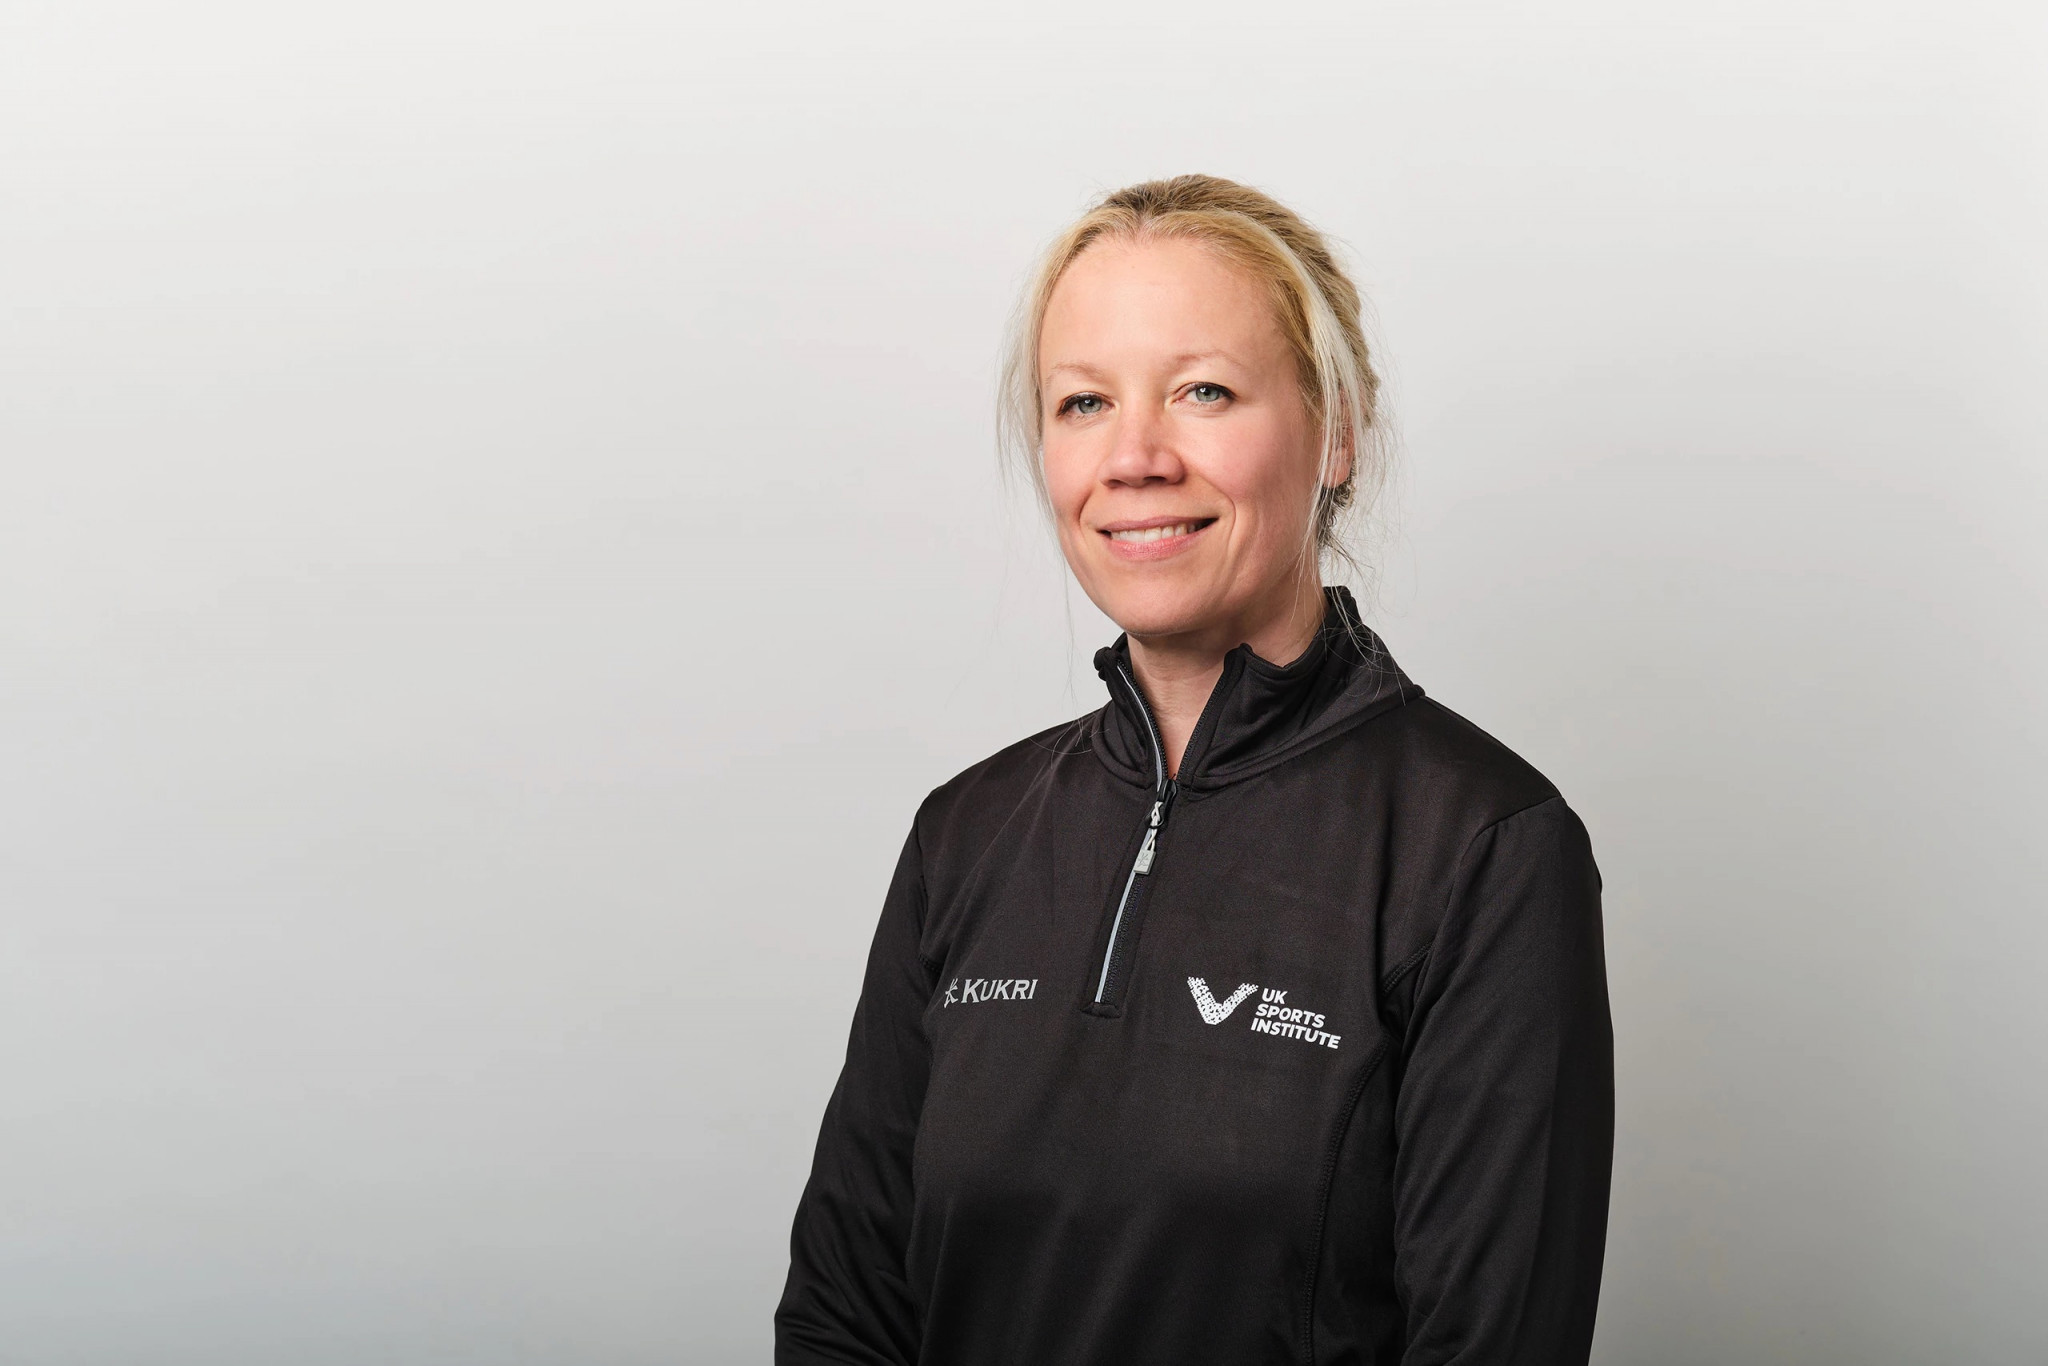 Kate Baker, director of performance at UK Sport, insisted 